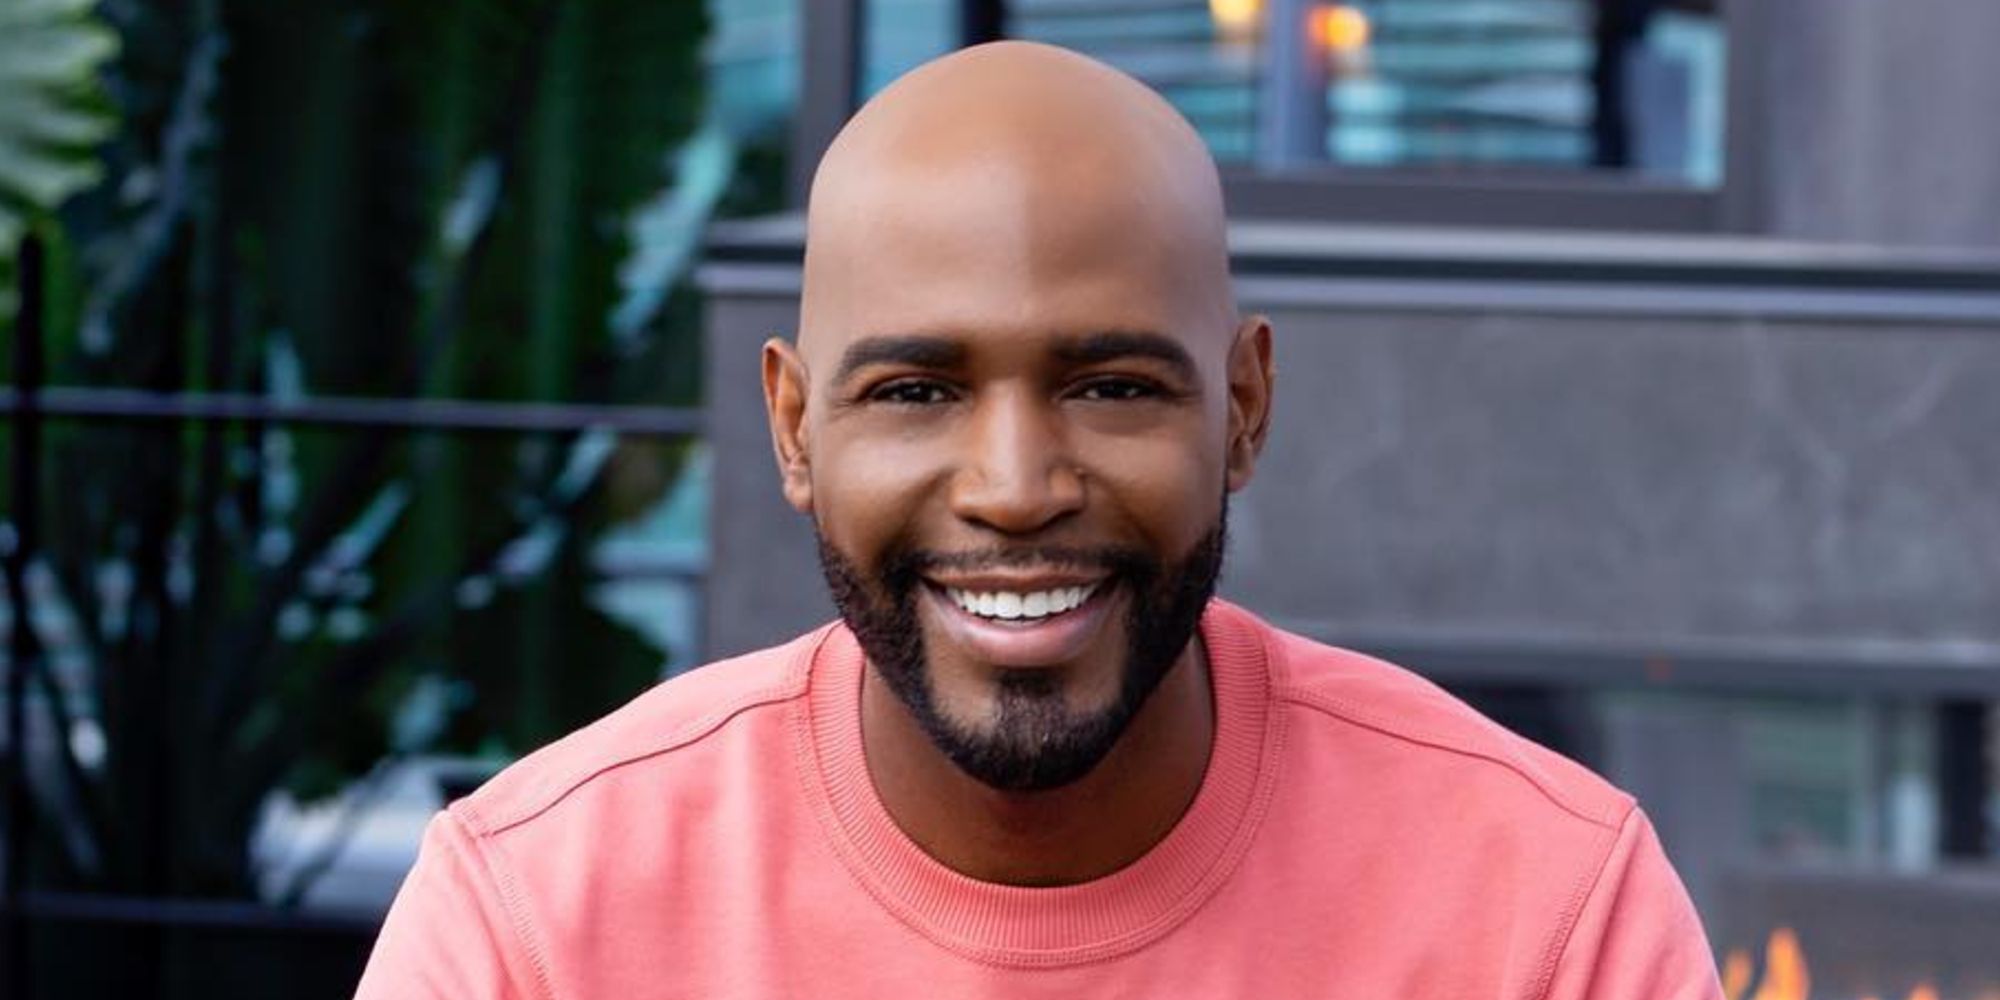 Karamo Brown from Queer Eye For The Straight Guy